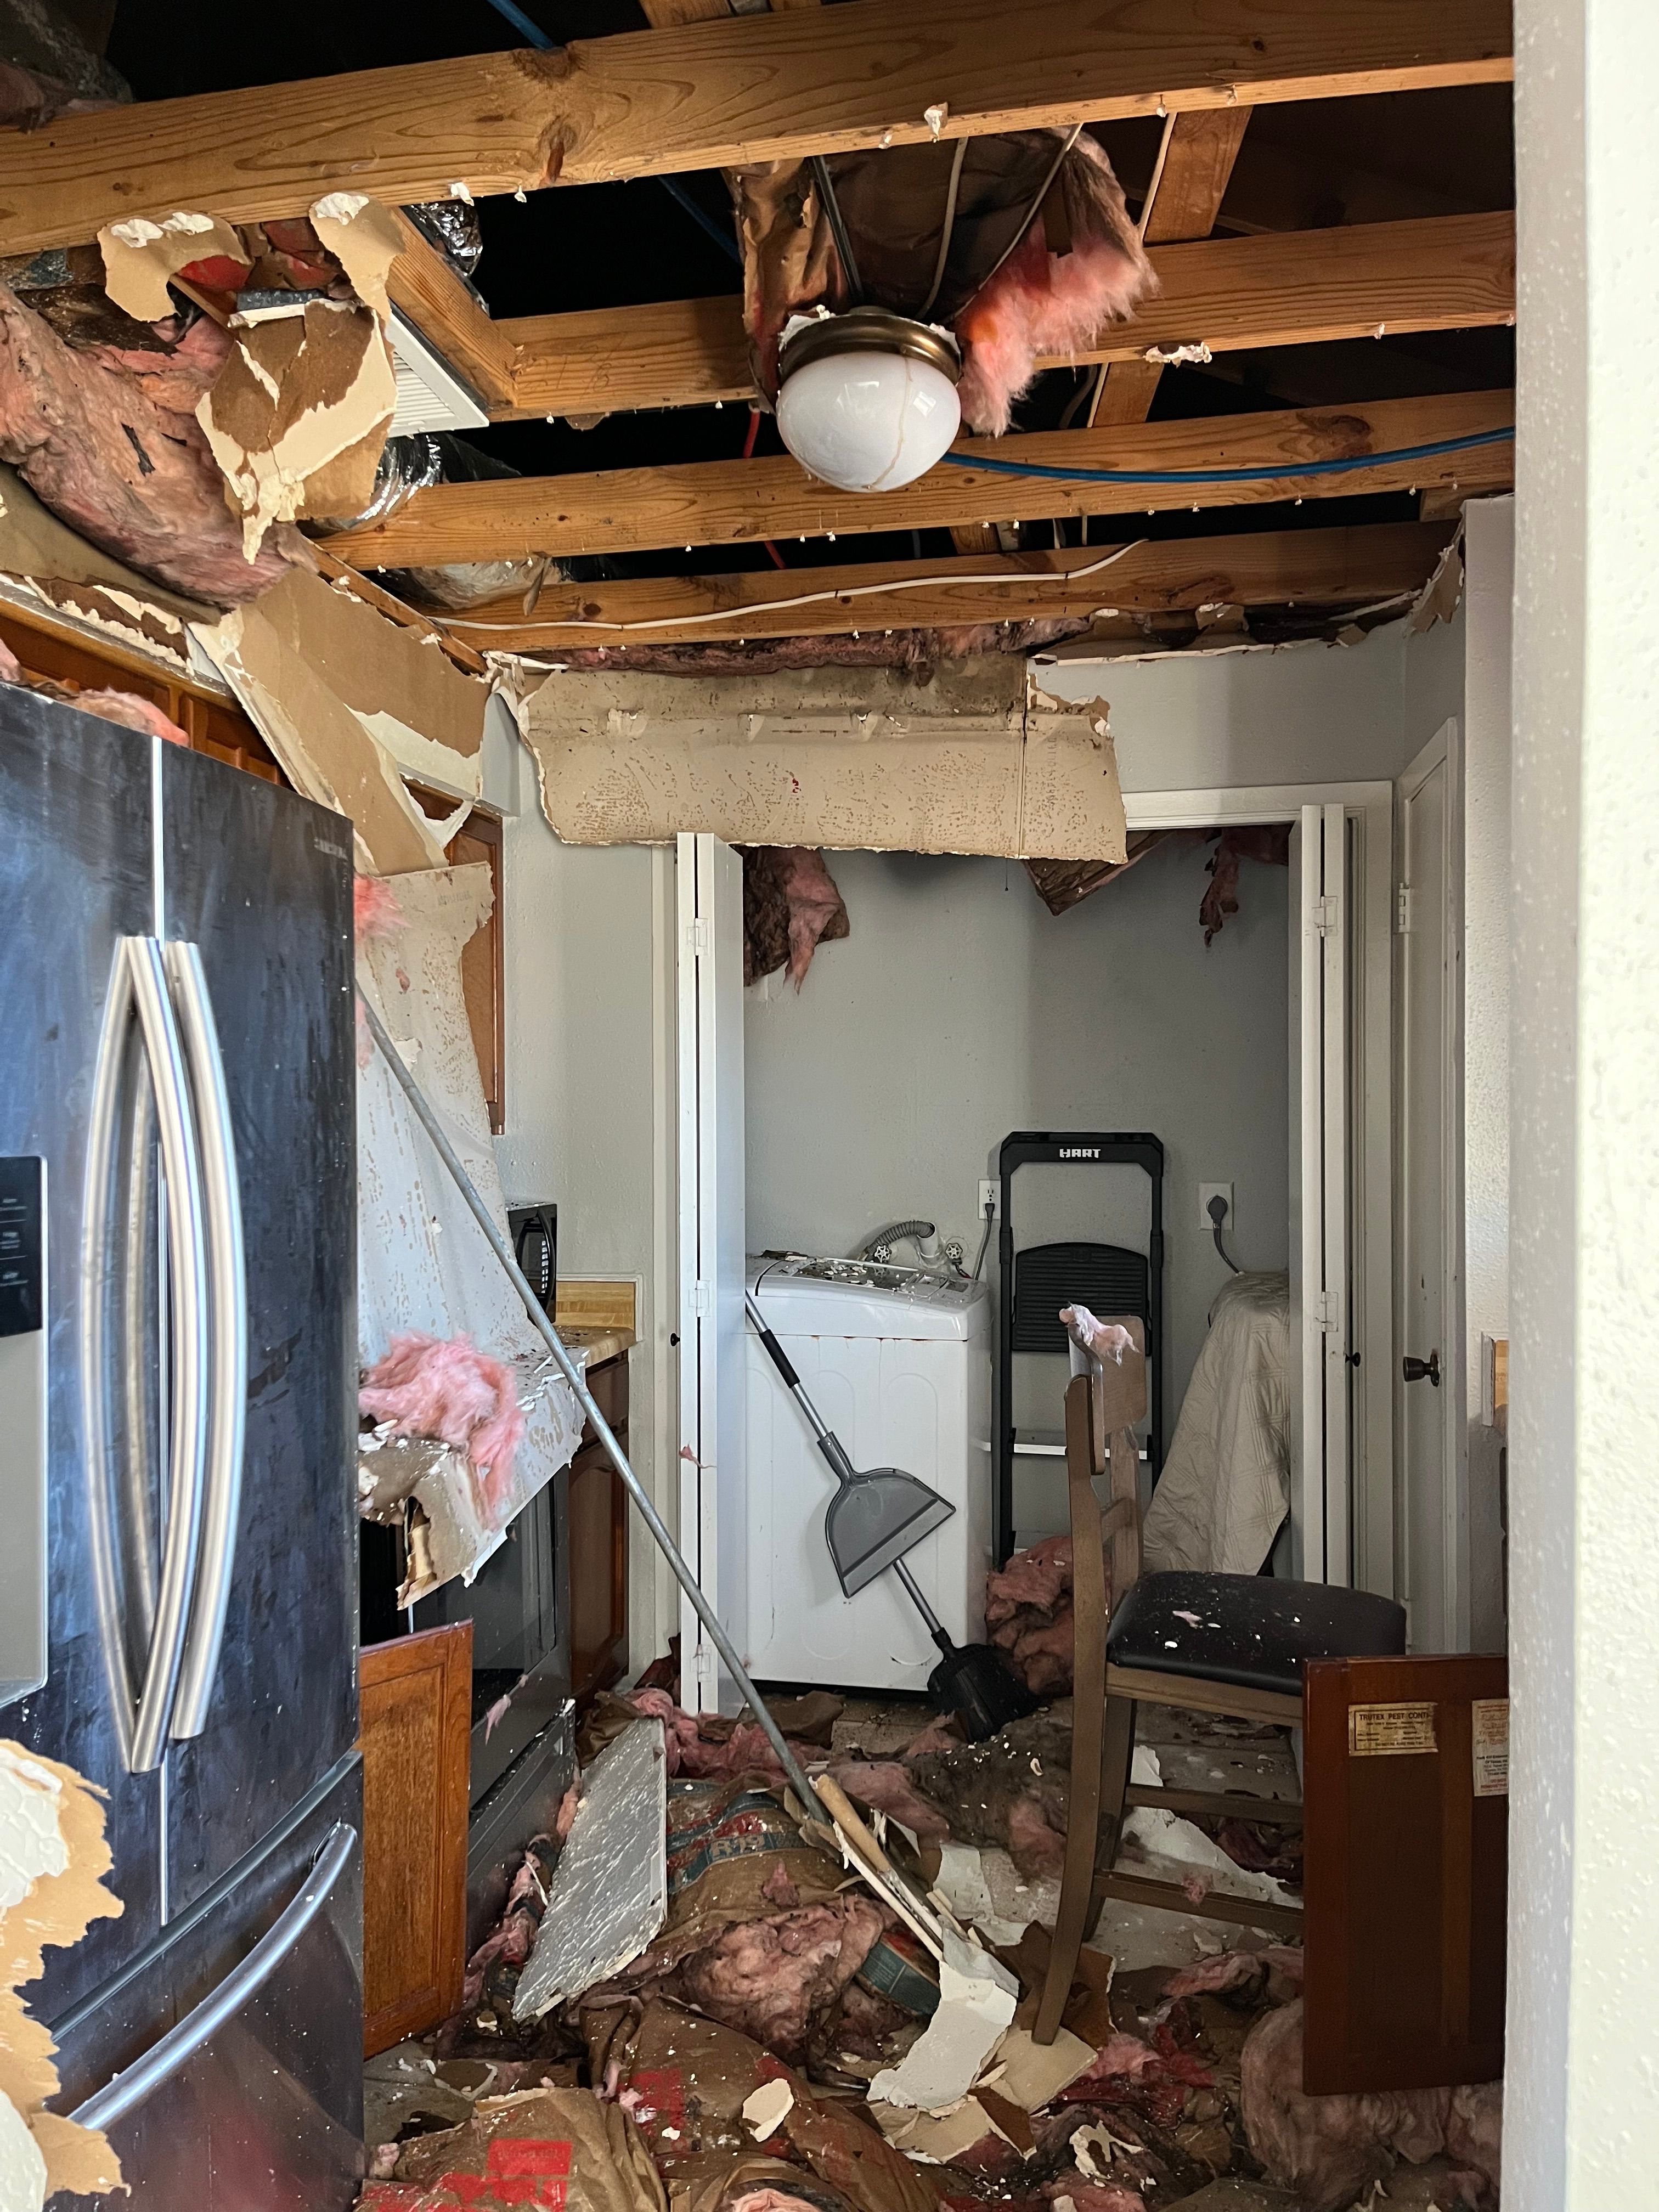 Fire and Water damage to kitchen